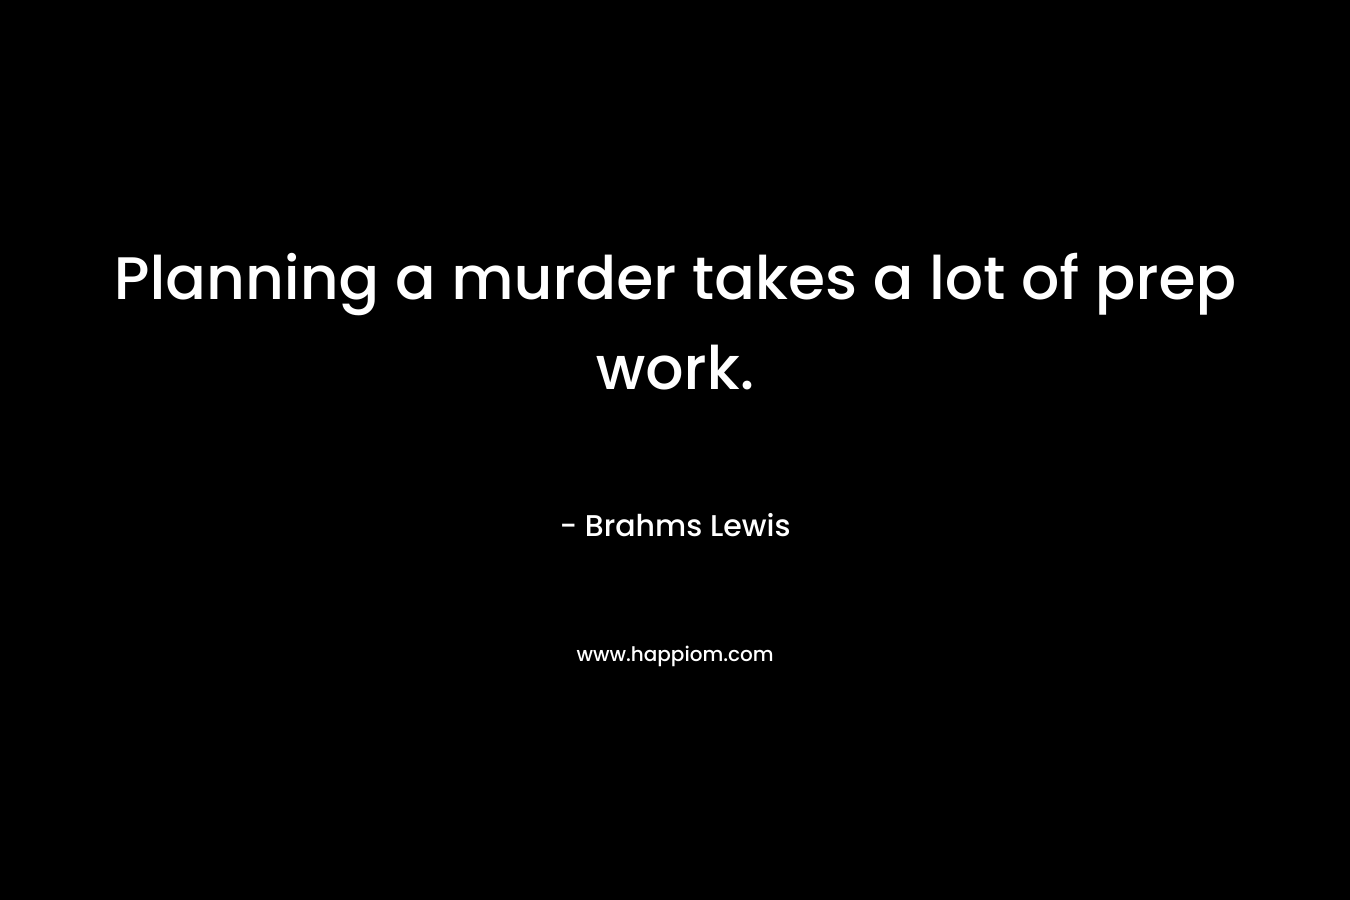 Planning a murder takes a lot of prep work. – Brahms Lewis